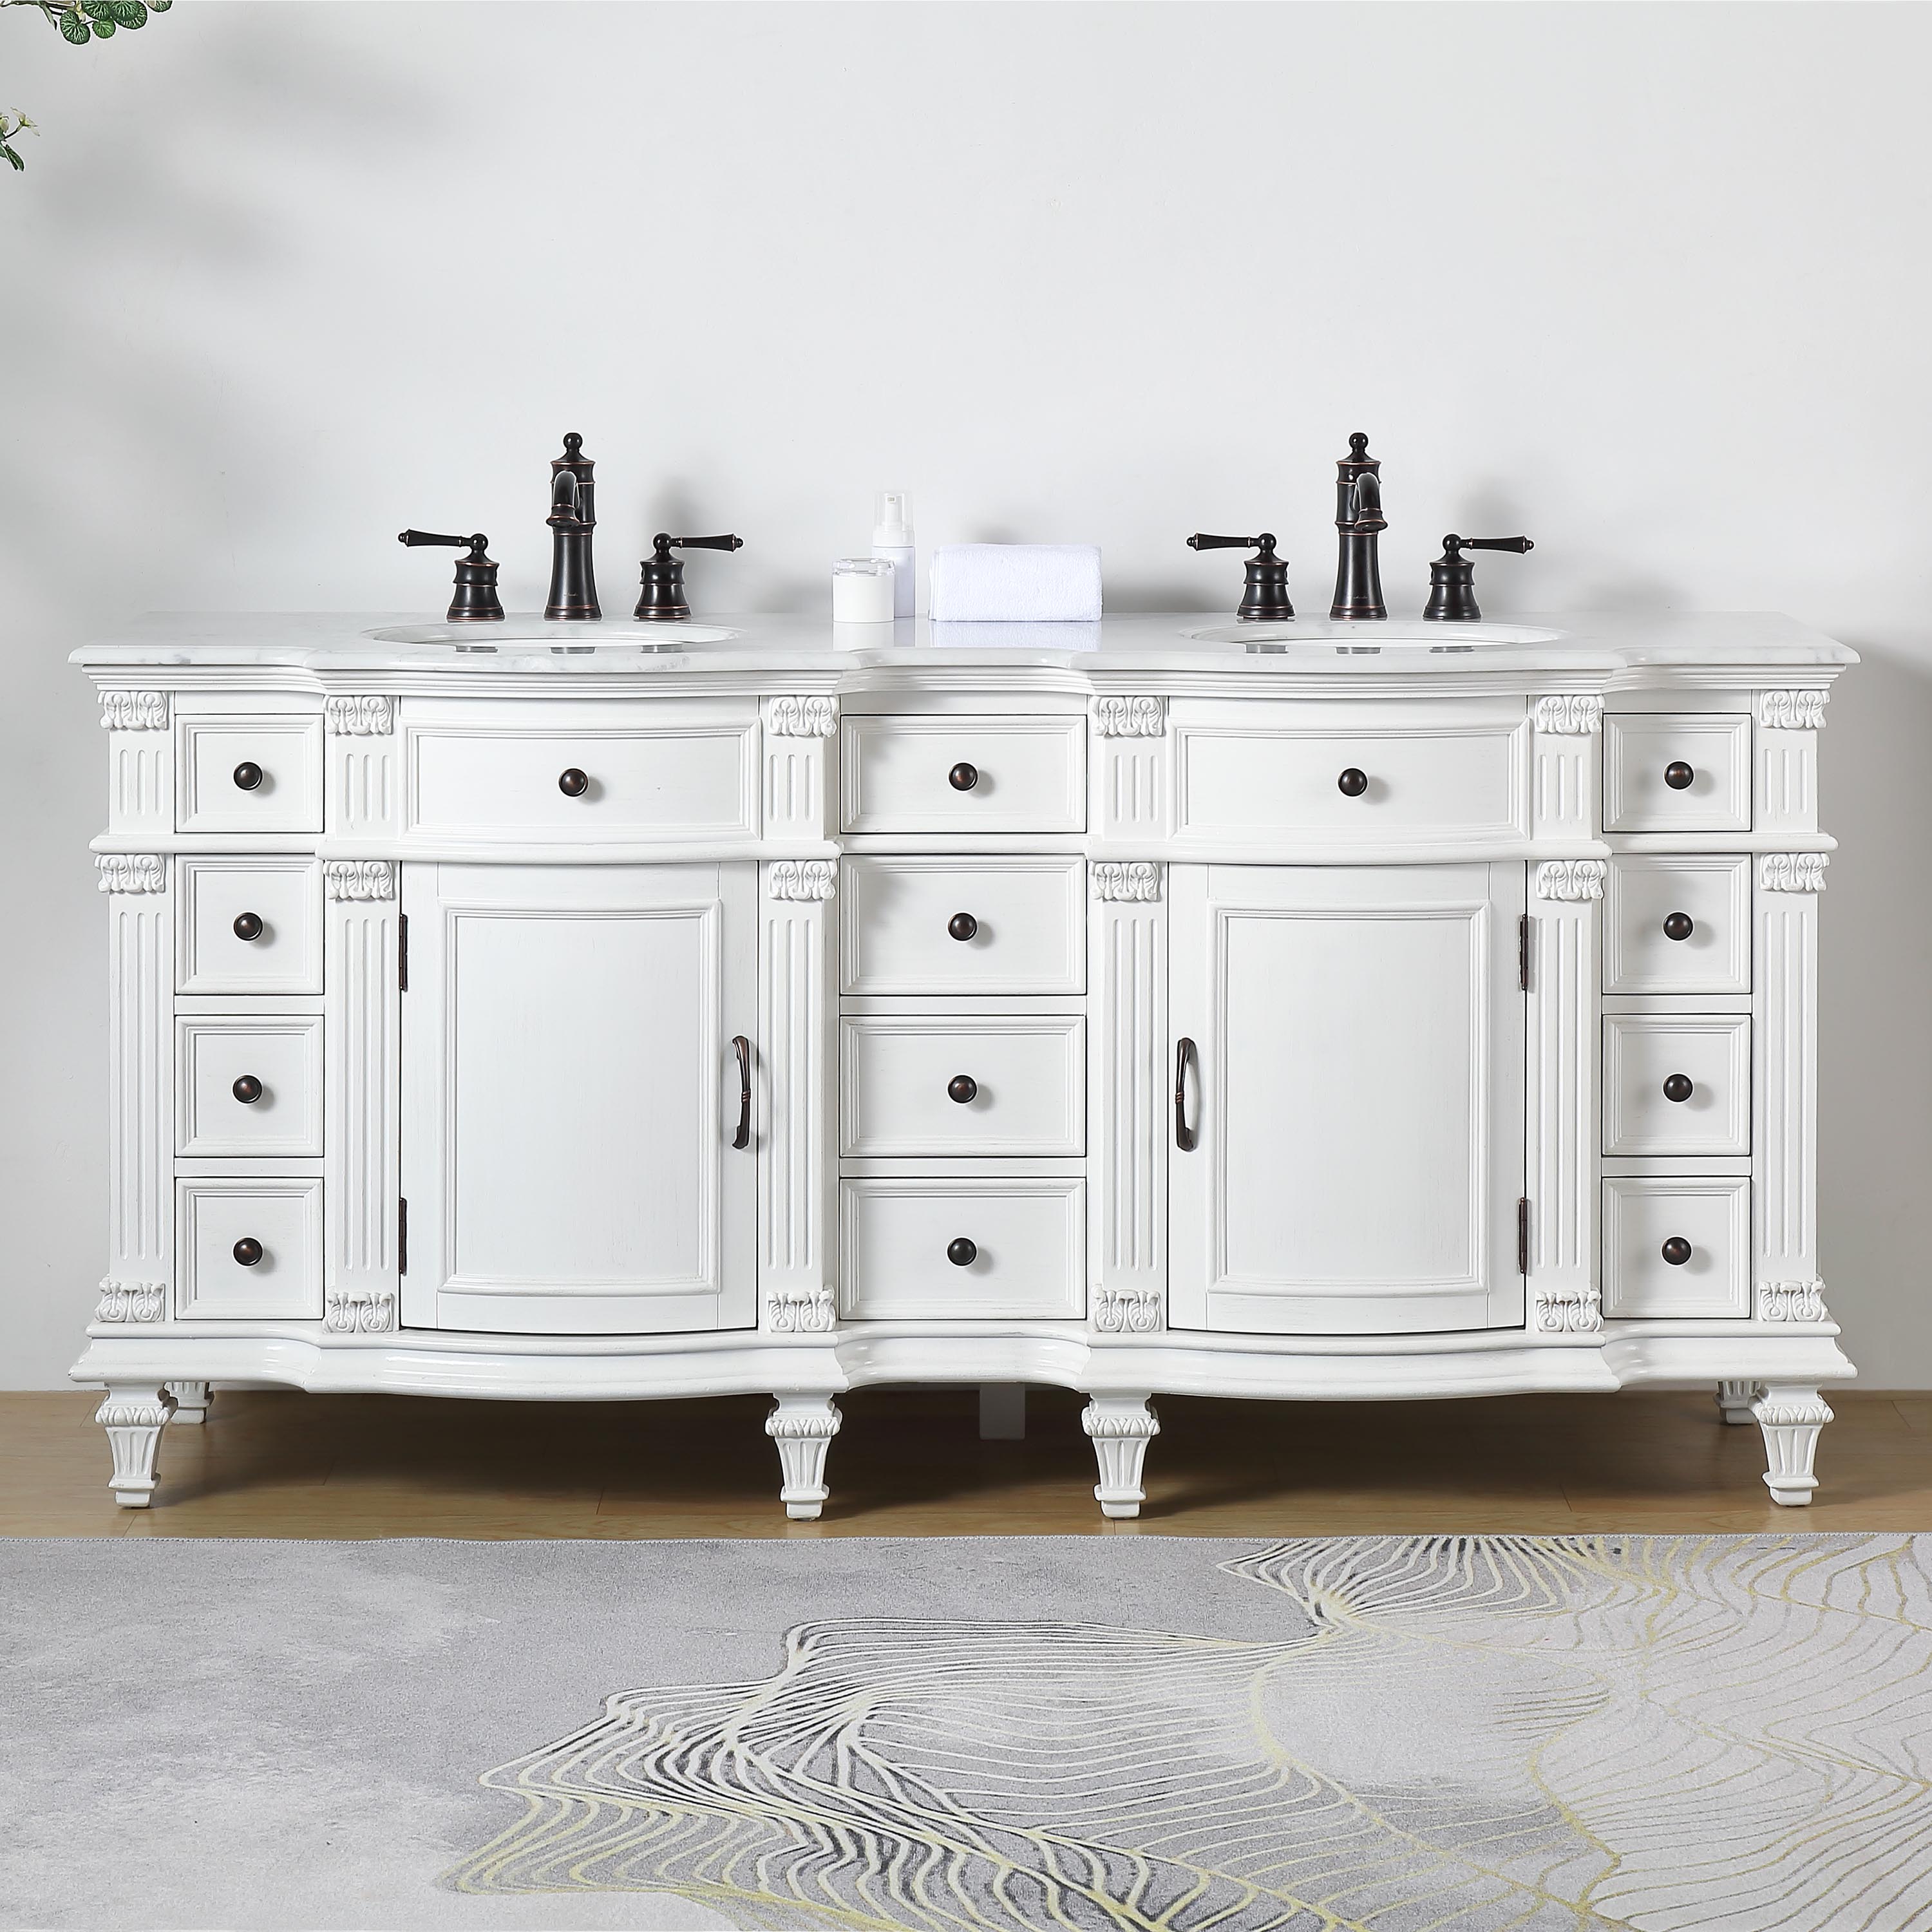 Adelina 72" Antique White Traditional Style Double Sink Bathroom Vanity with White Carrara Marble Countertop